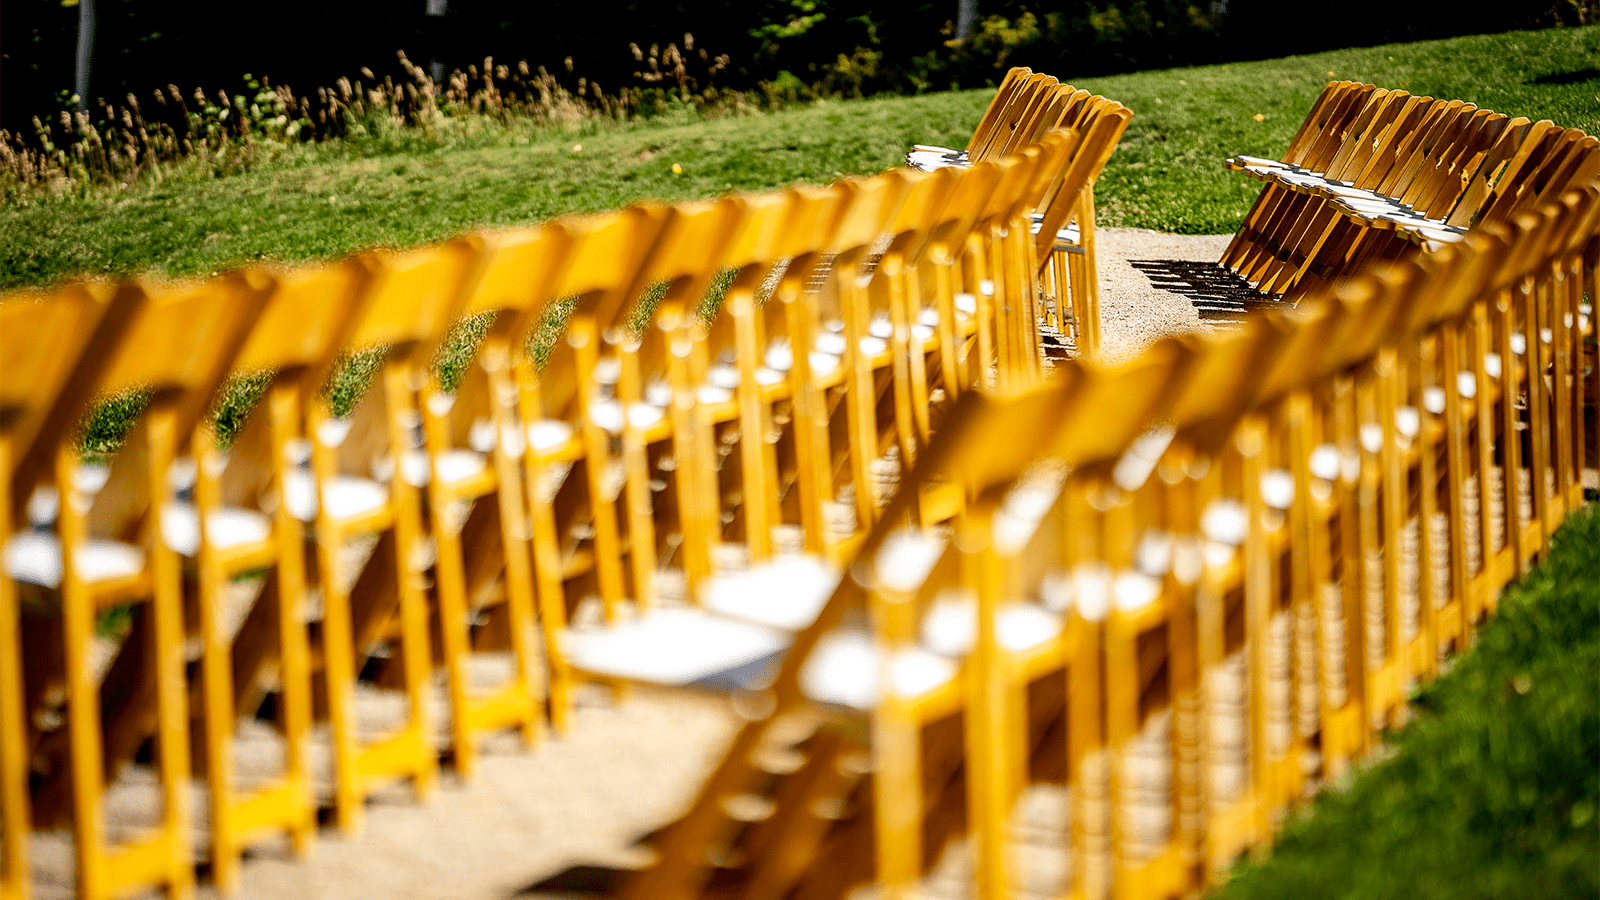 wooden wedding seats lines up in preparation for the big day